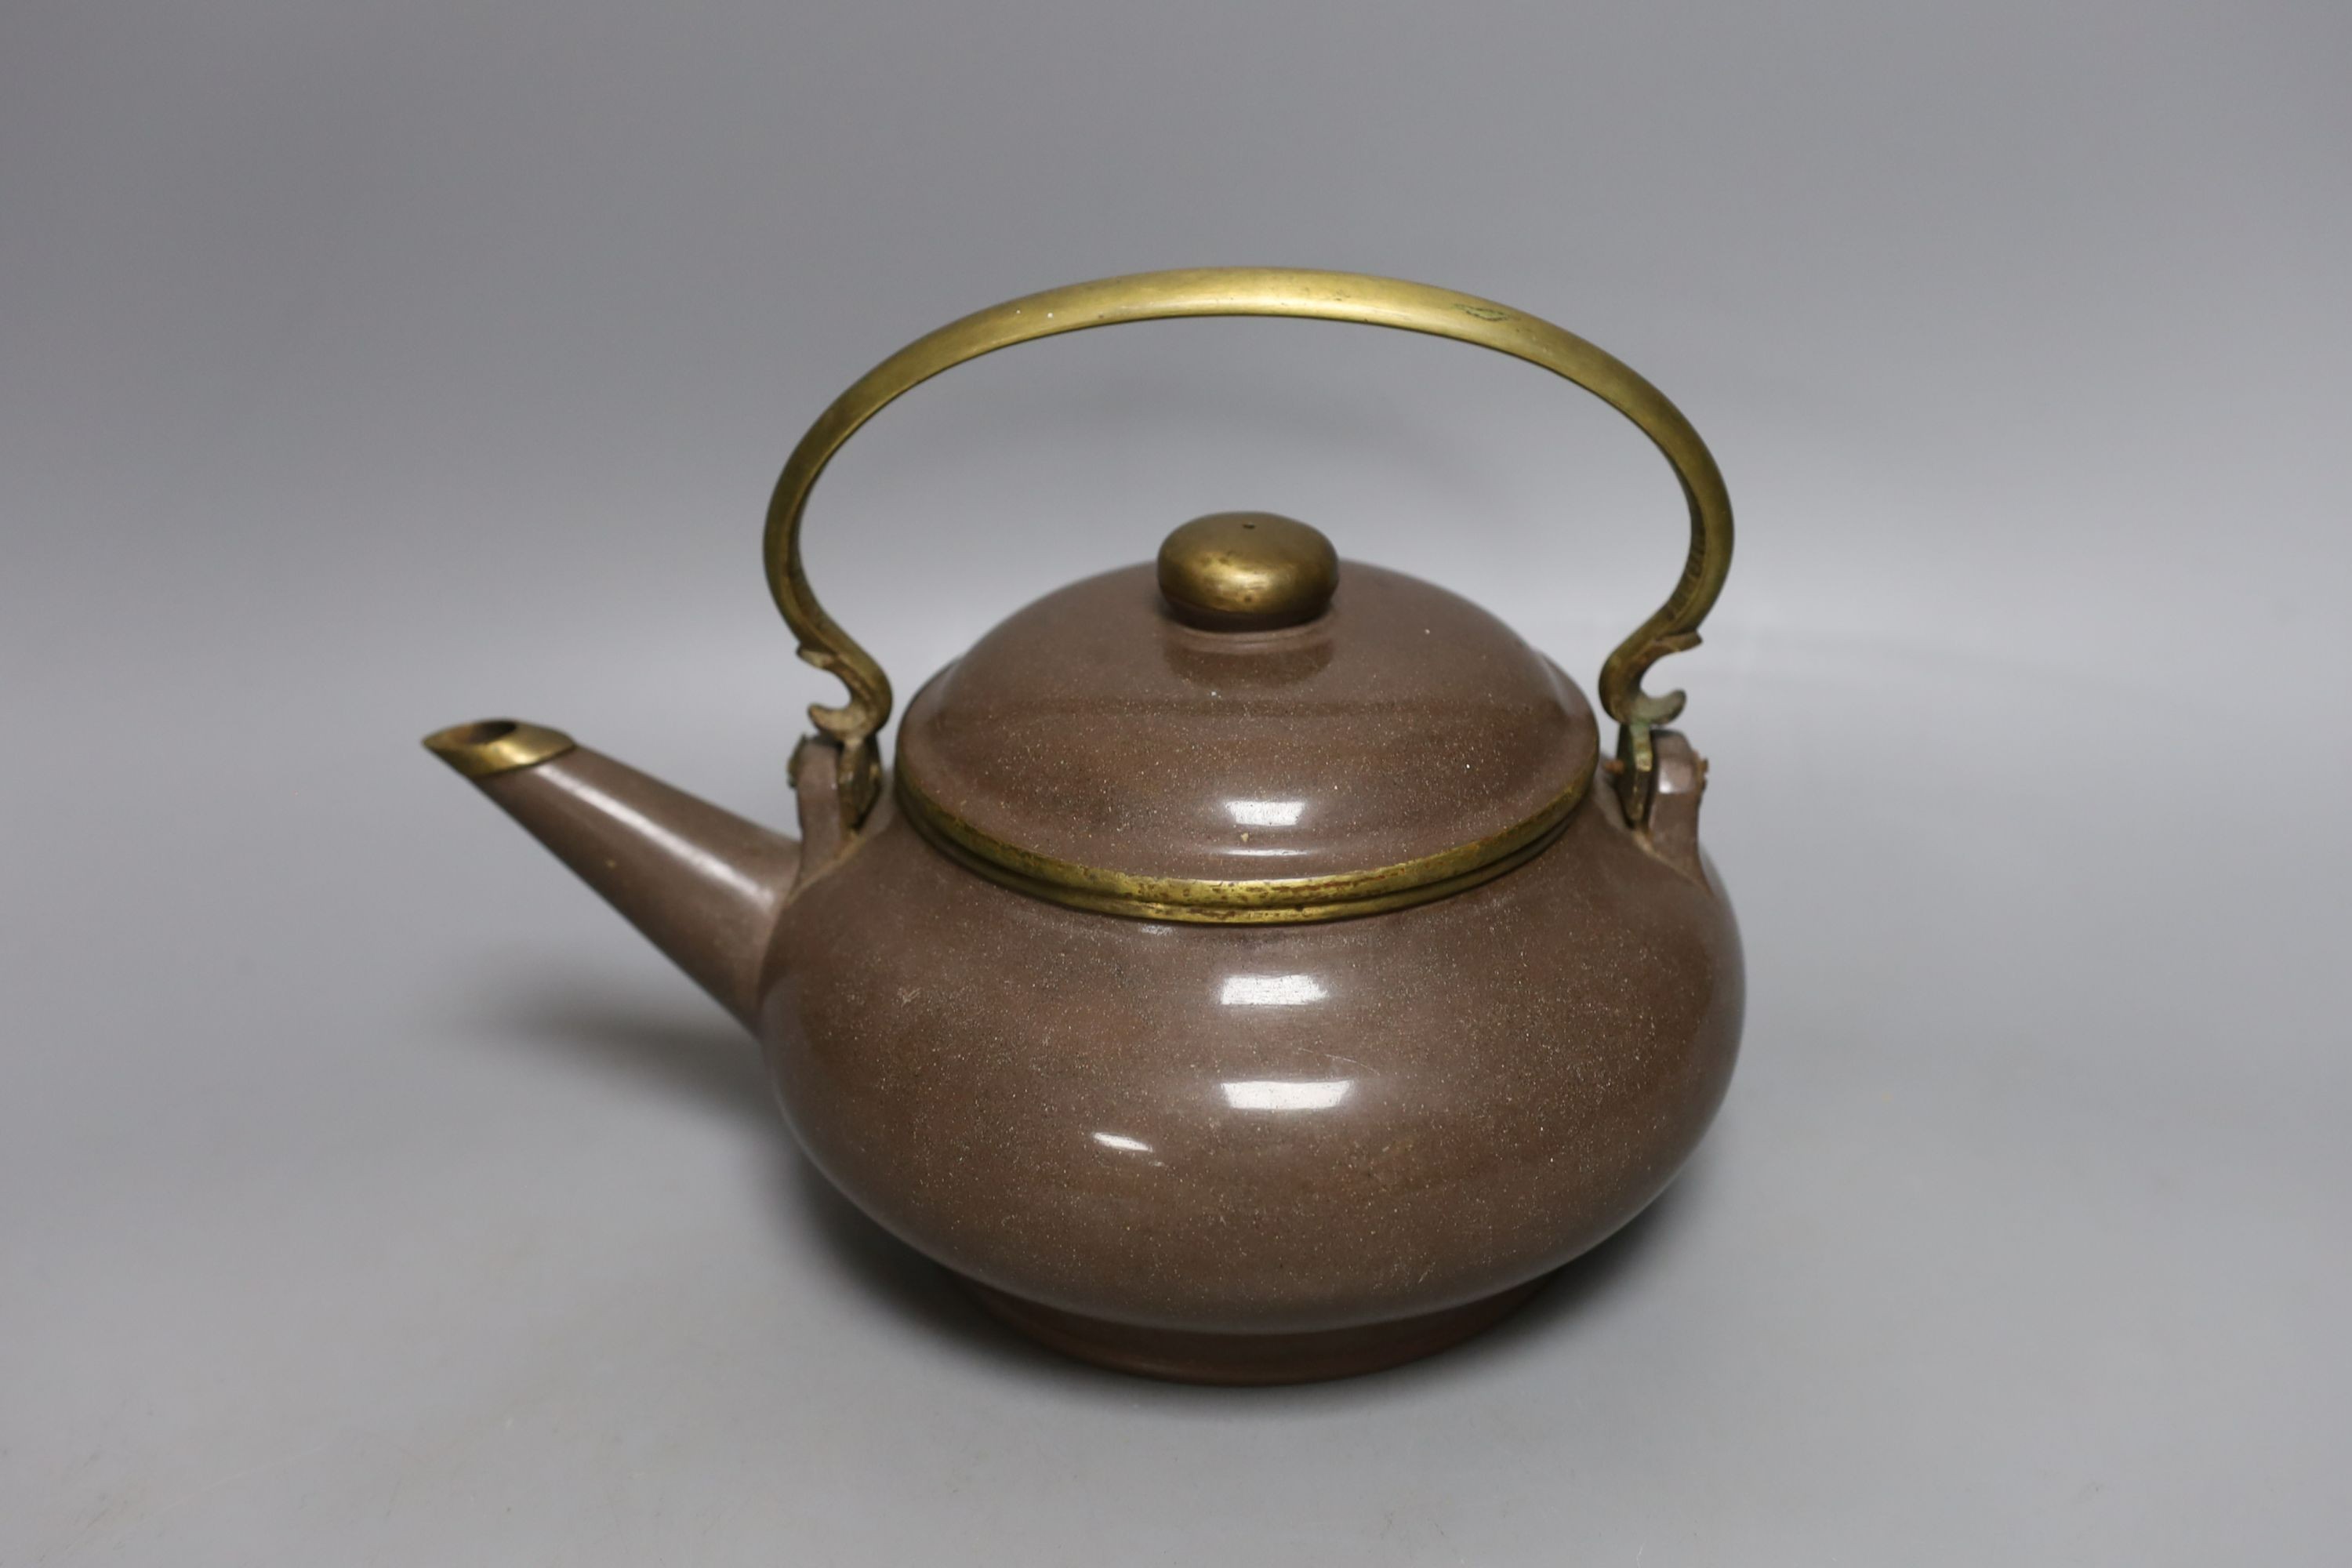 A Chinese Yixing polished pottery teapot, 19th century, made for the Thai market - 19cm tall